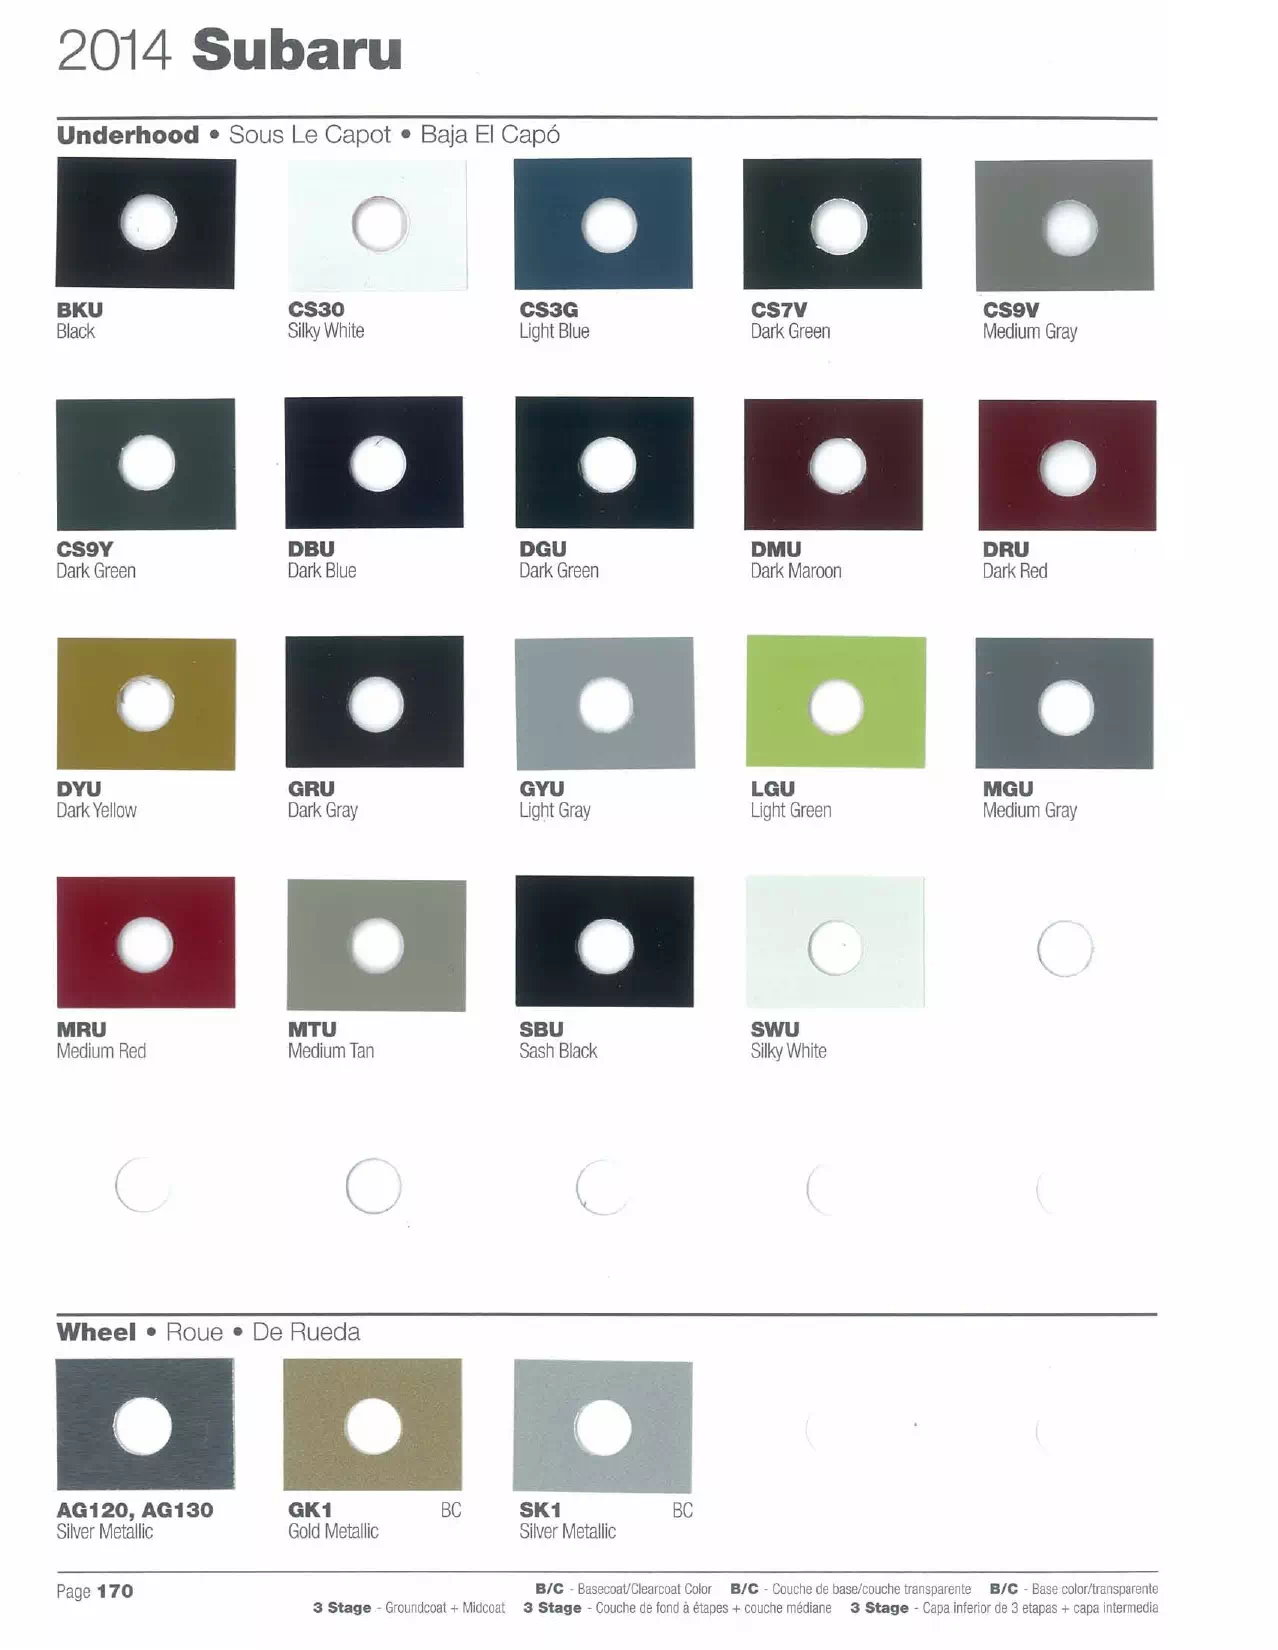 Color Codes and Paint Examples used on 2014 Subaru Vehicles